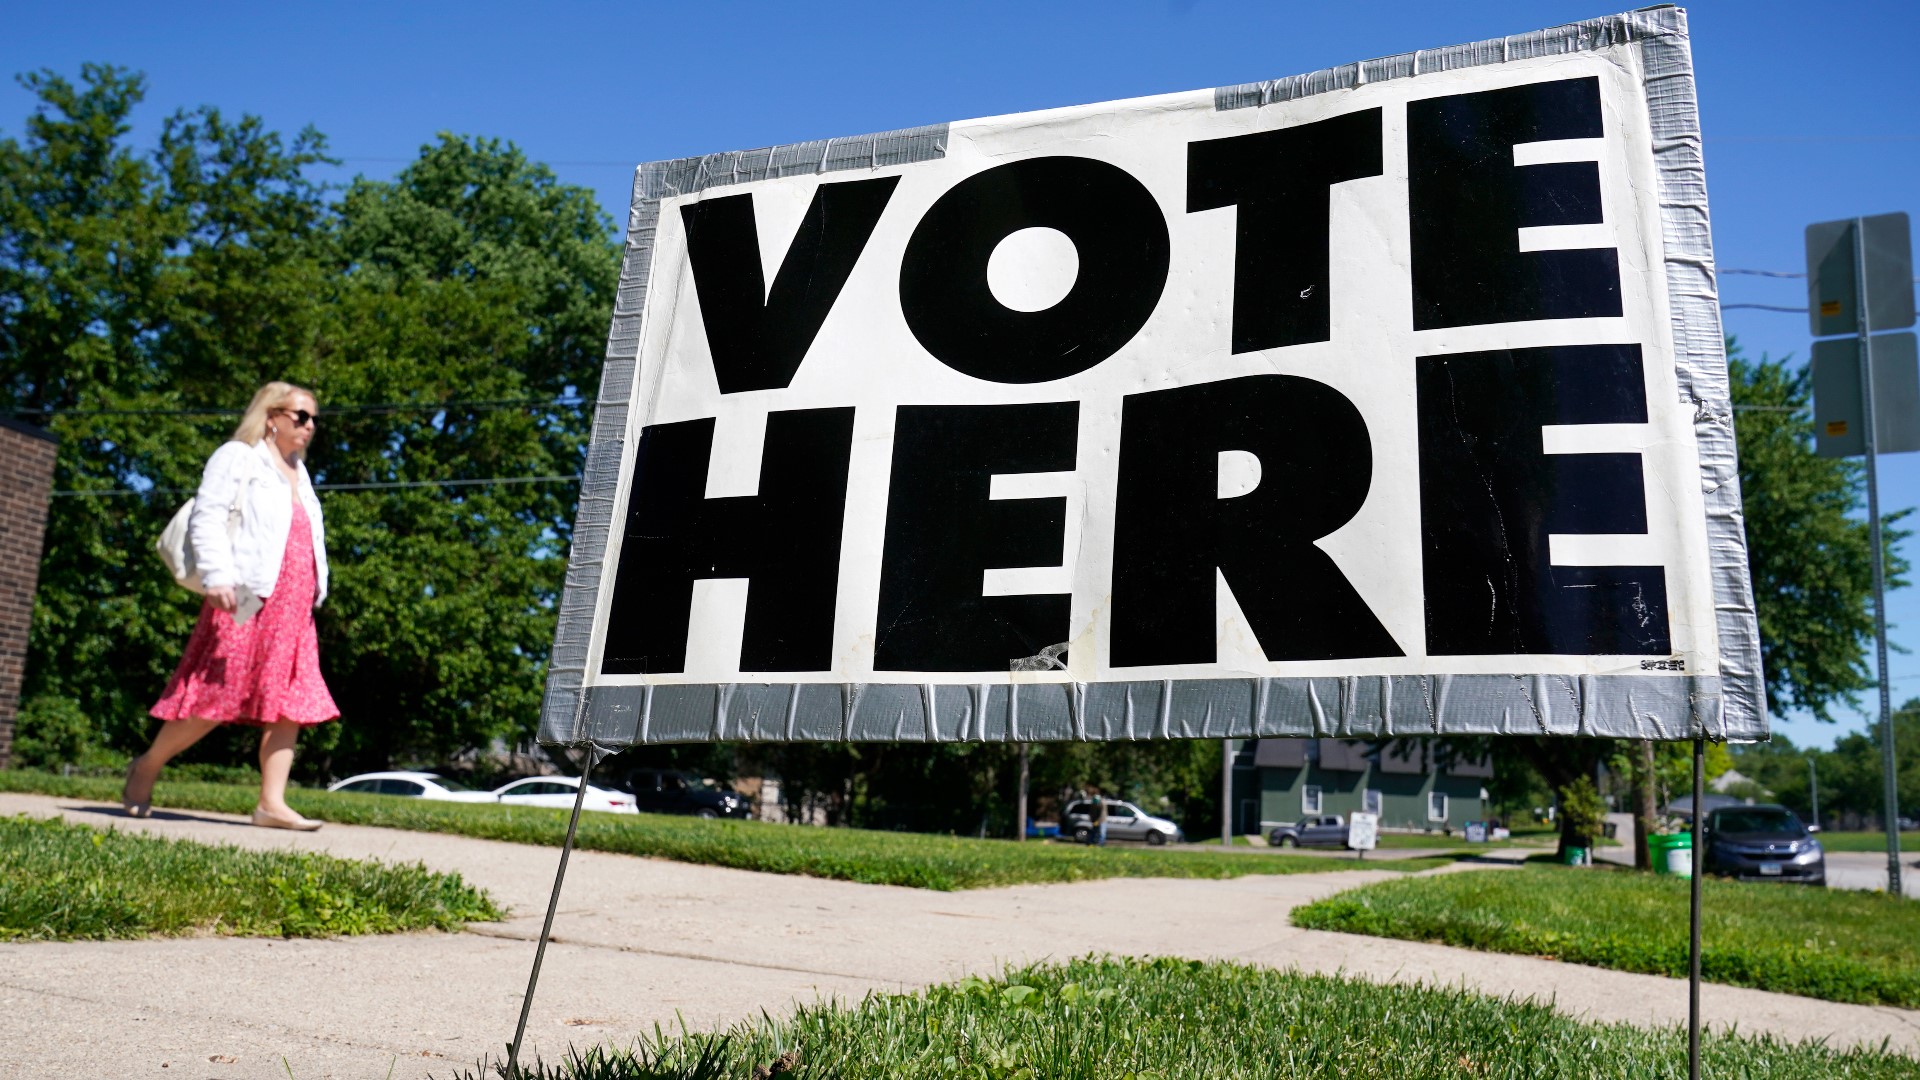 On Tuesday, Nov. 8, Iowans will cast their ballots for the 2022 General Election. Here's what voters should know before completing their civic duty this year.